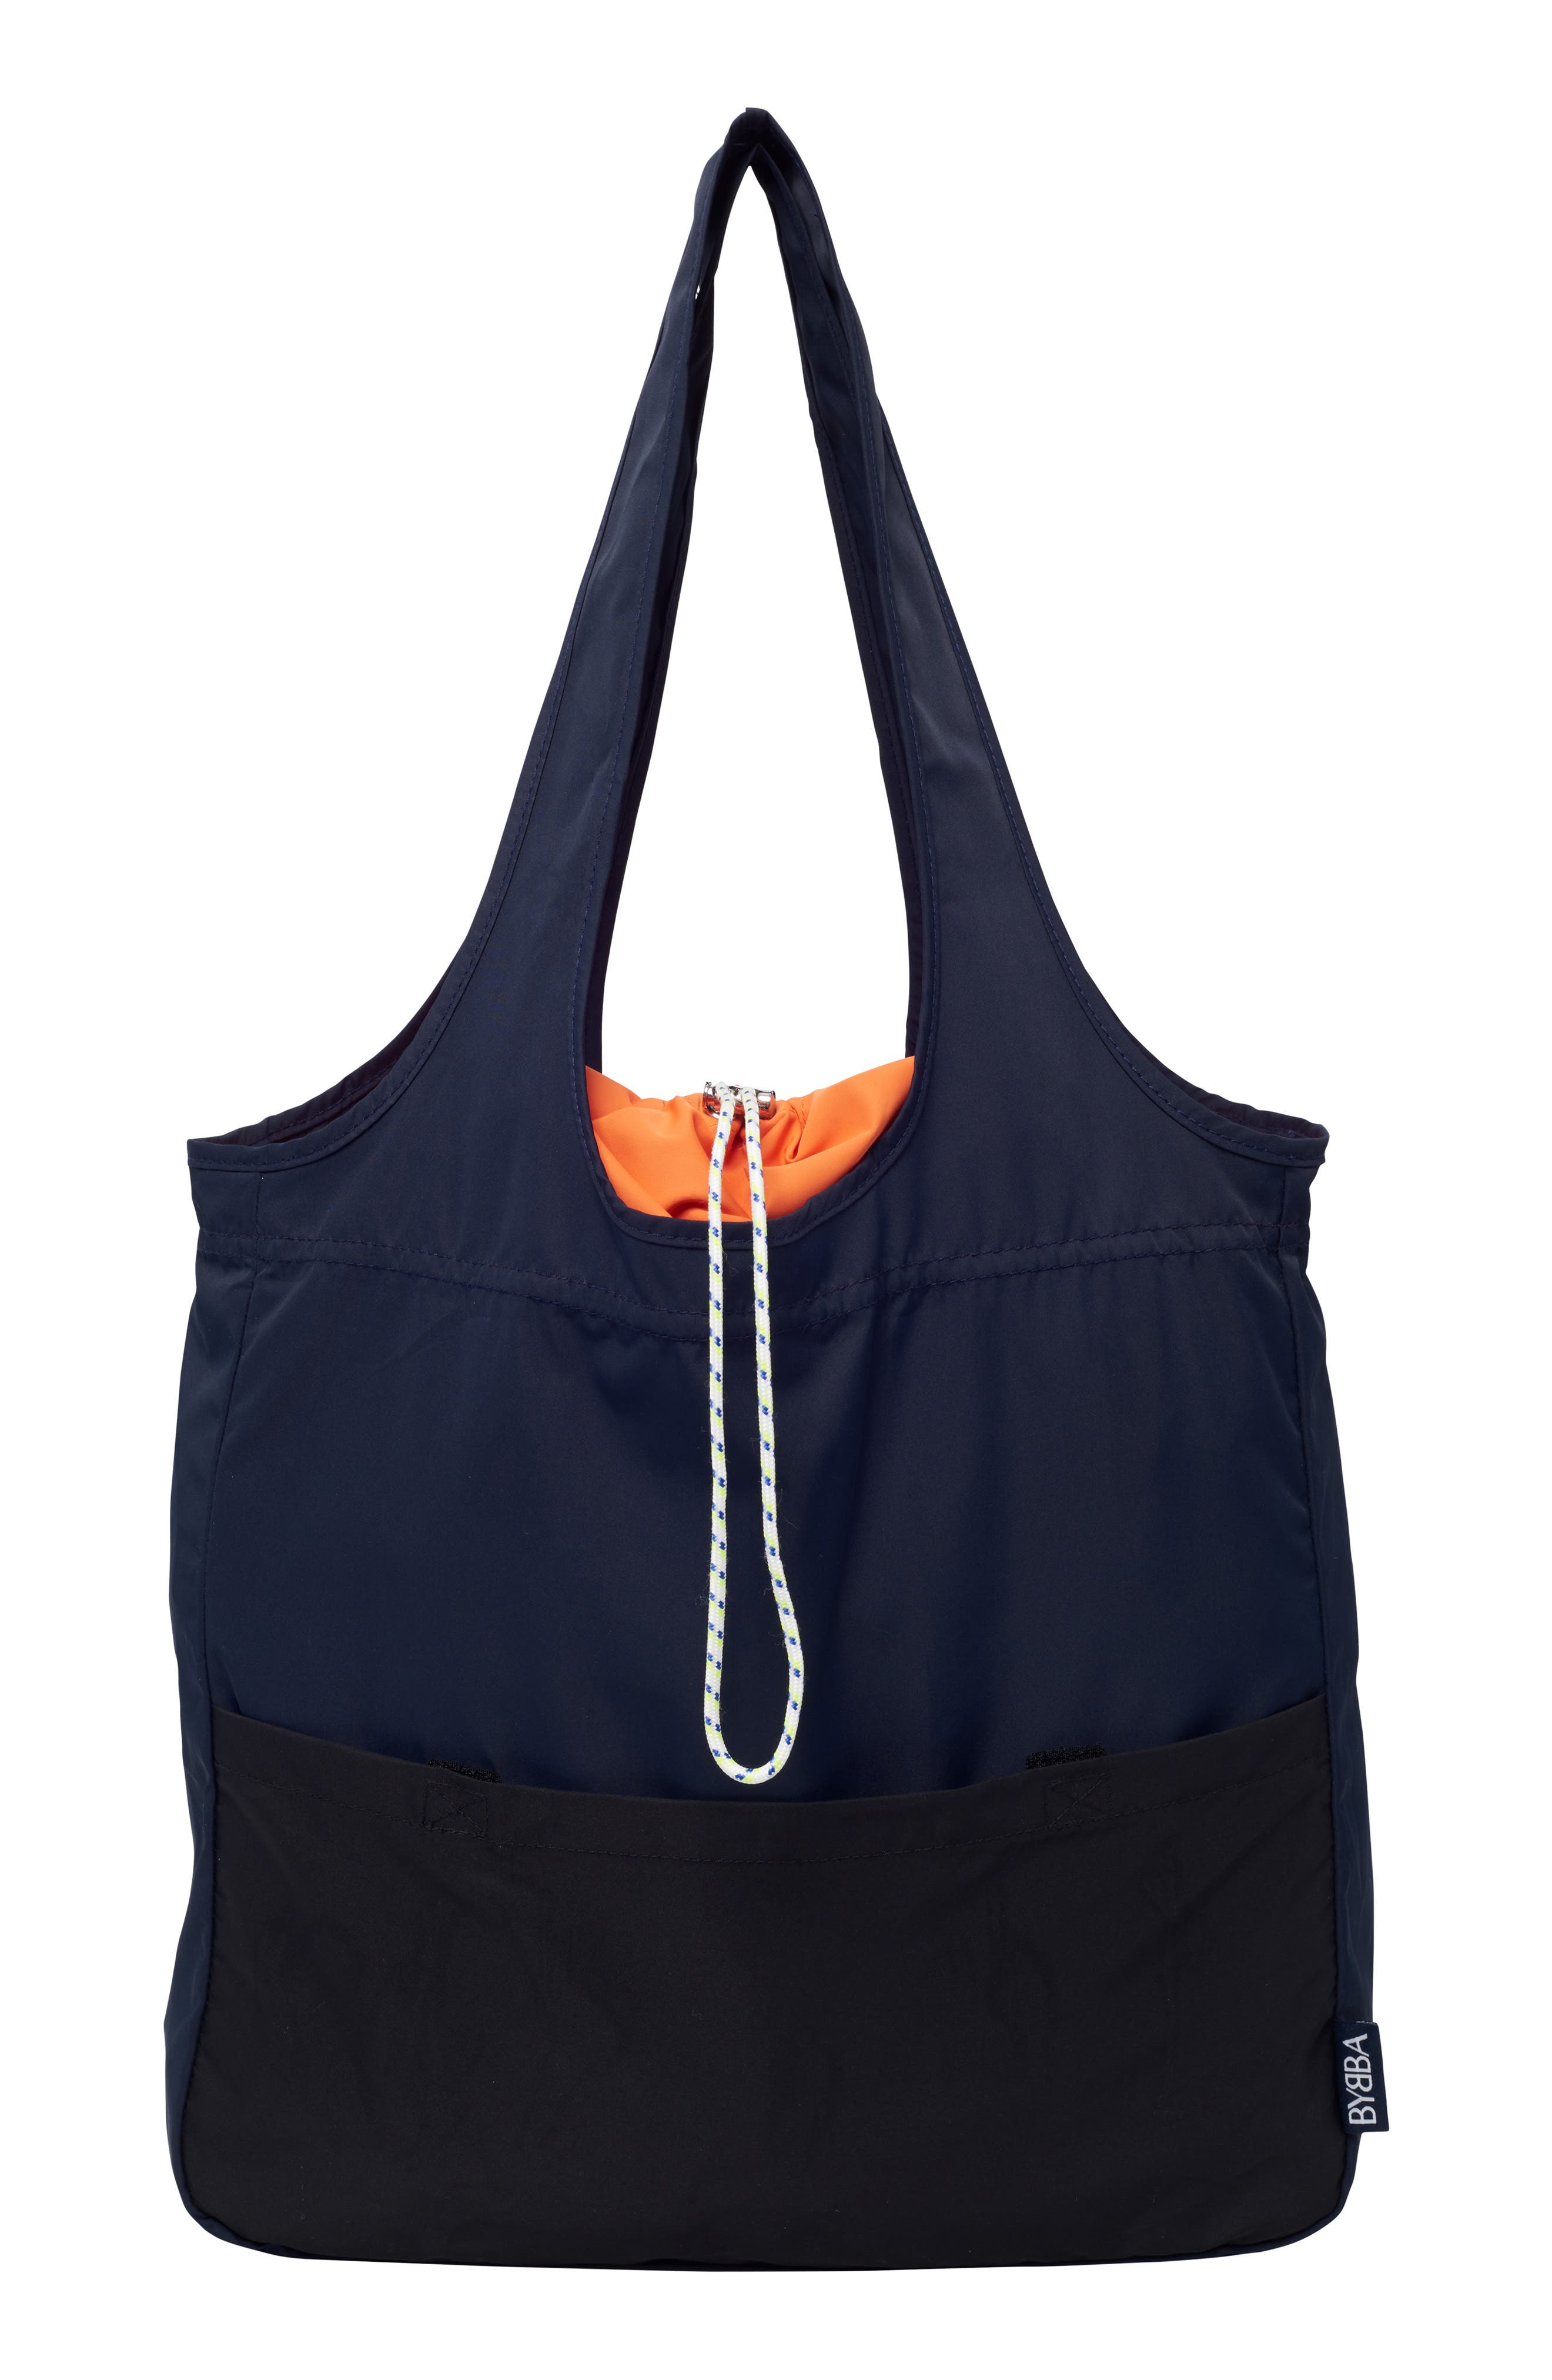 BYBBA Balos Tote in Buoy at Nordstrom